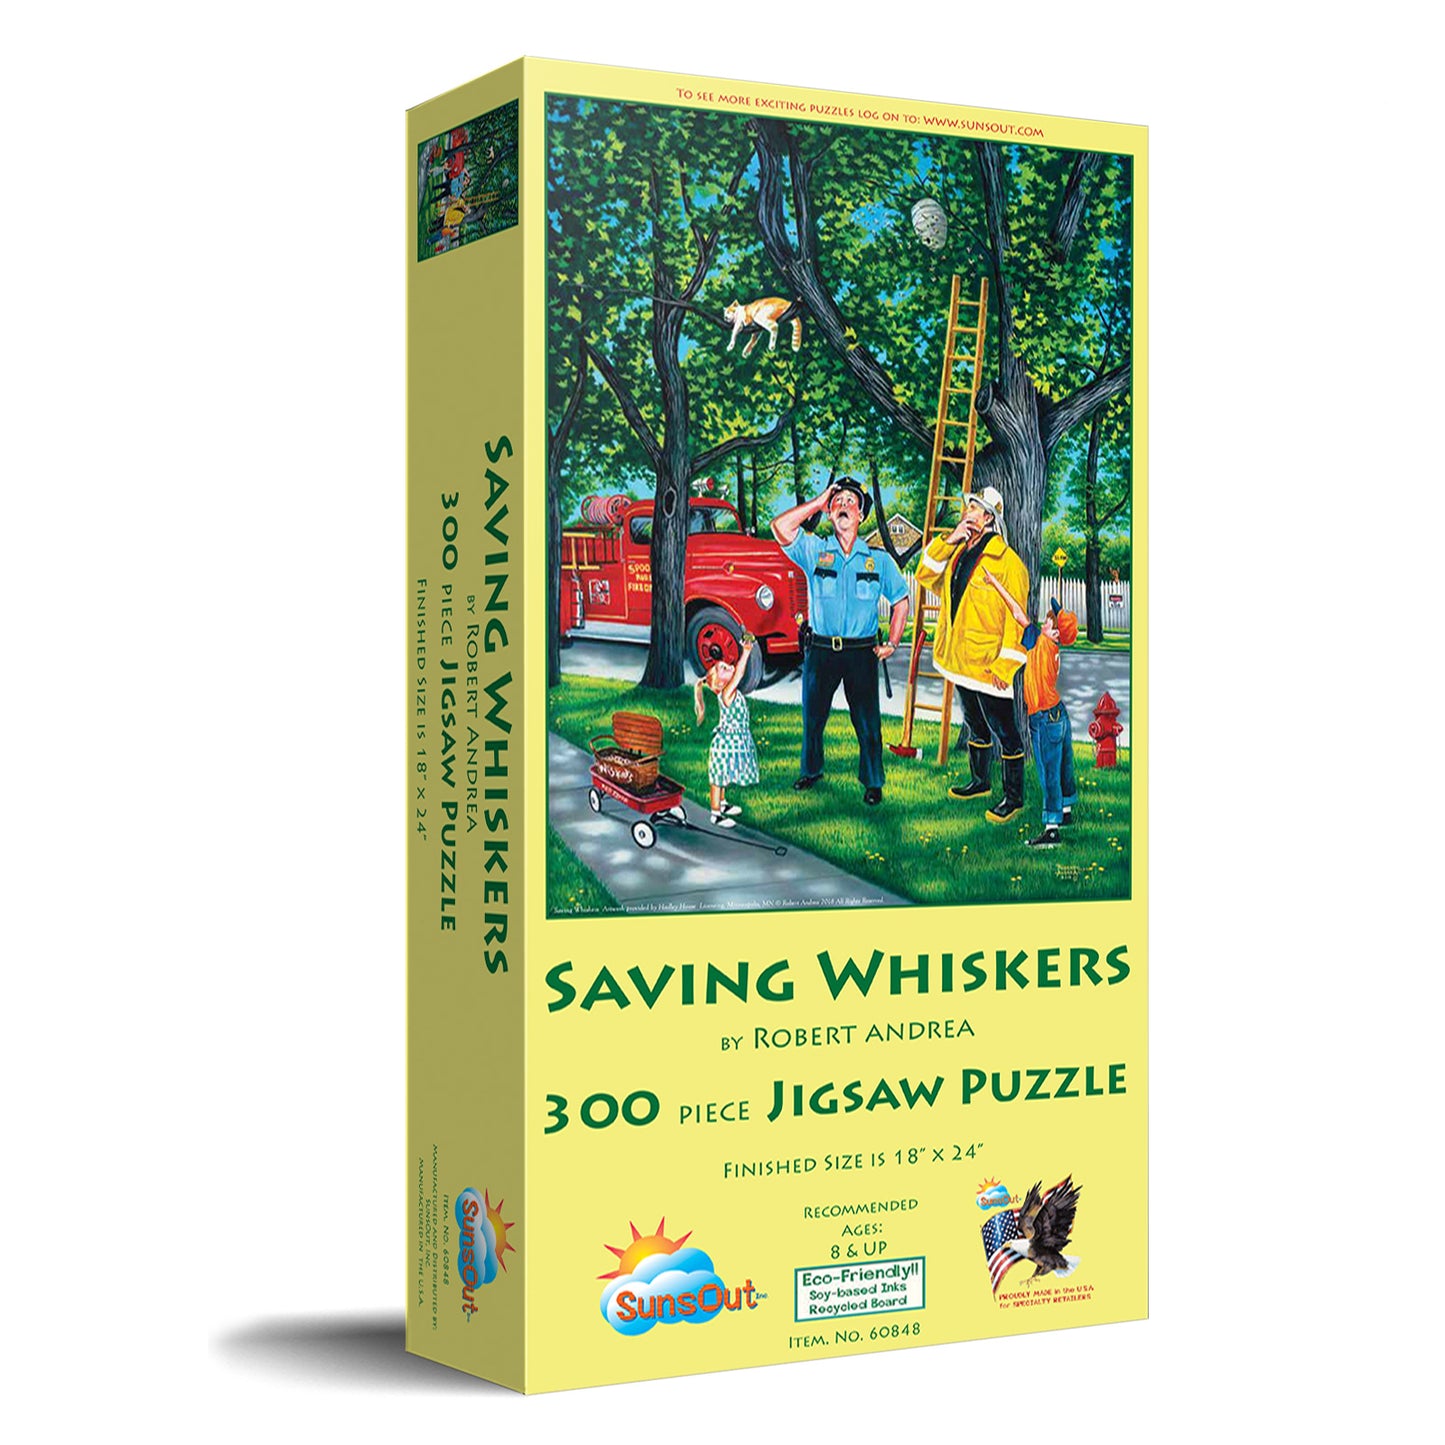 Saving Whiskers - 300 Piece Jigsaw Puzzle